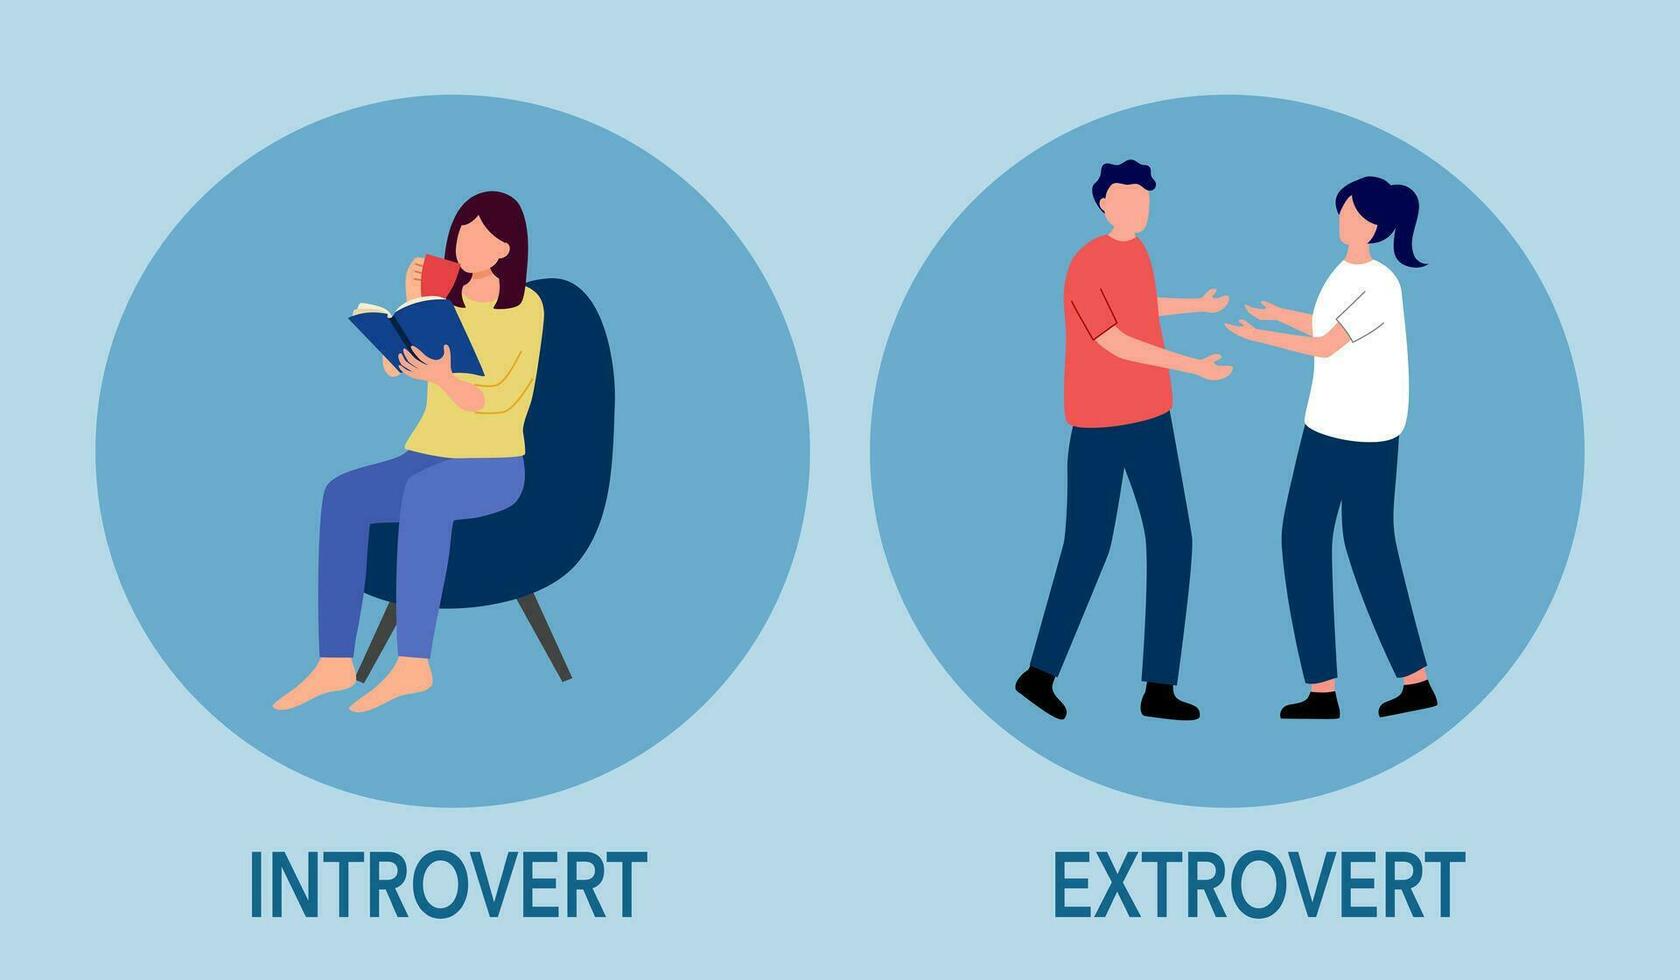 Introvert and extrovert personality character concept vector illustration. Introvert woman enjoy reading book alone. Extrovert people are talkative and enjoy meeting new people.